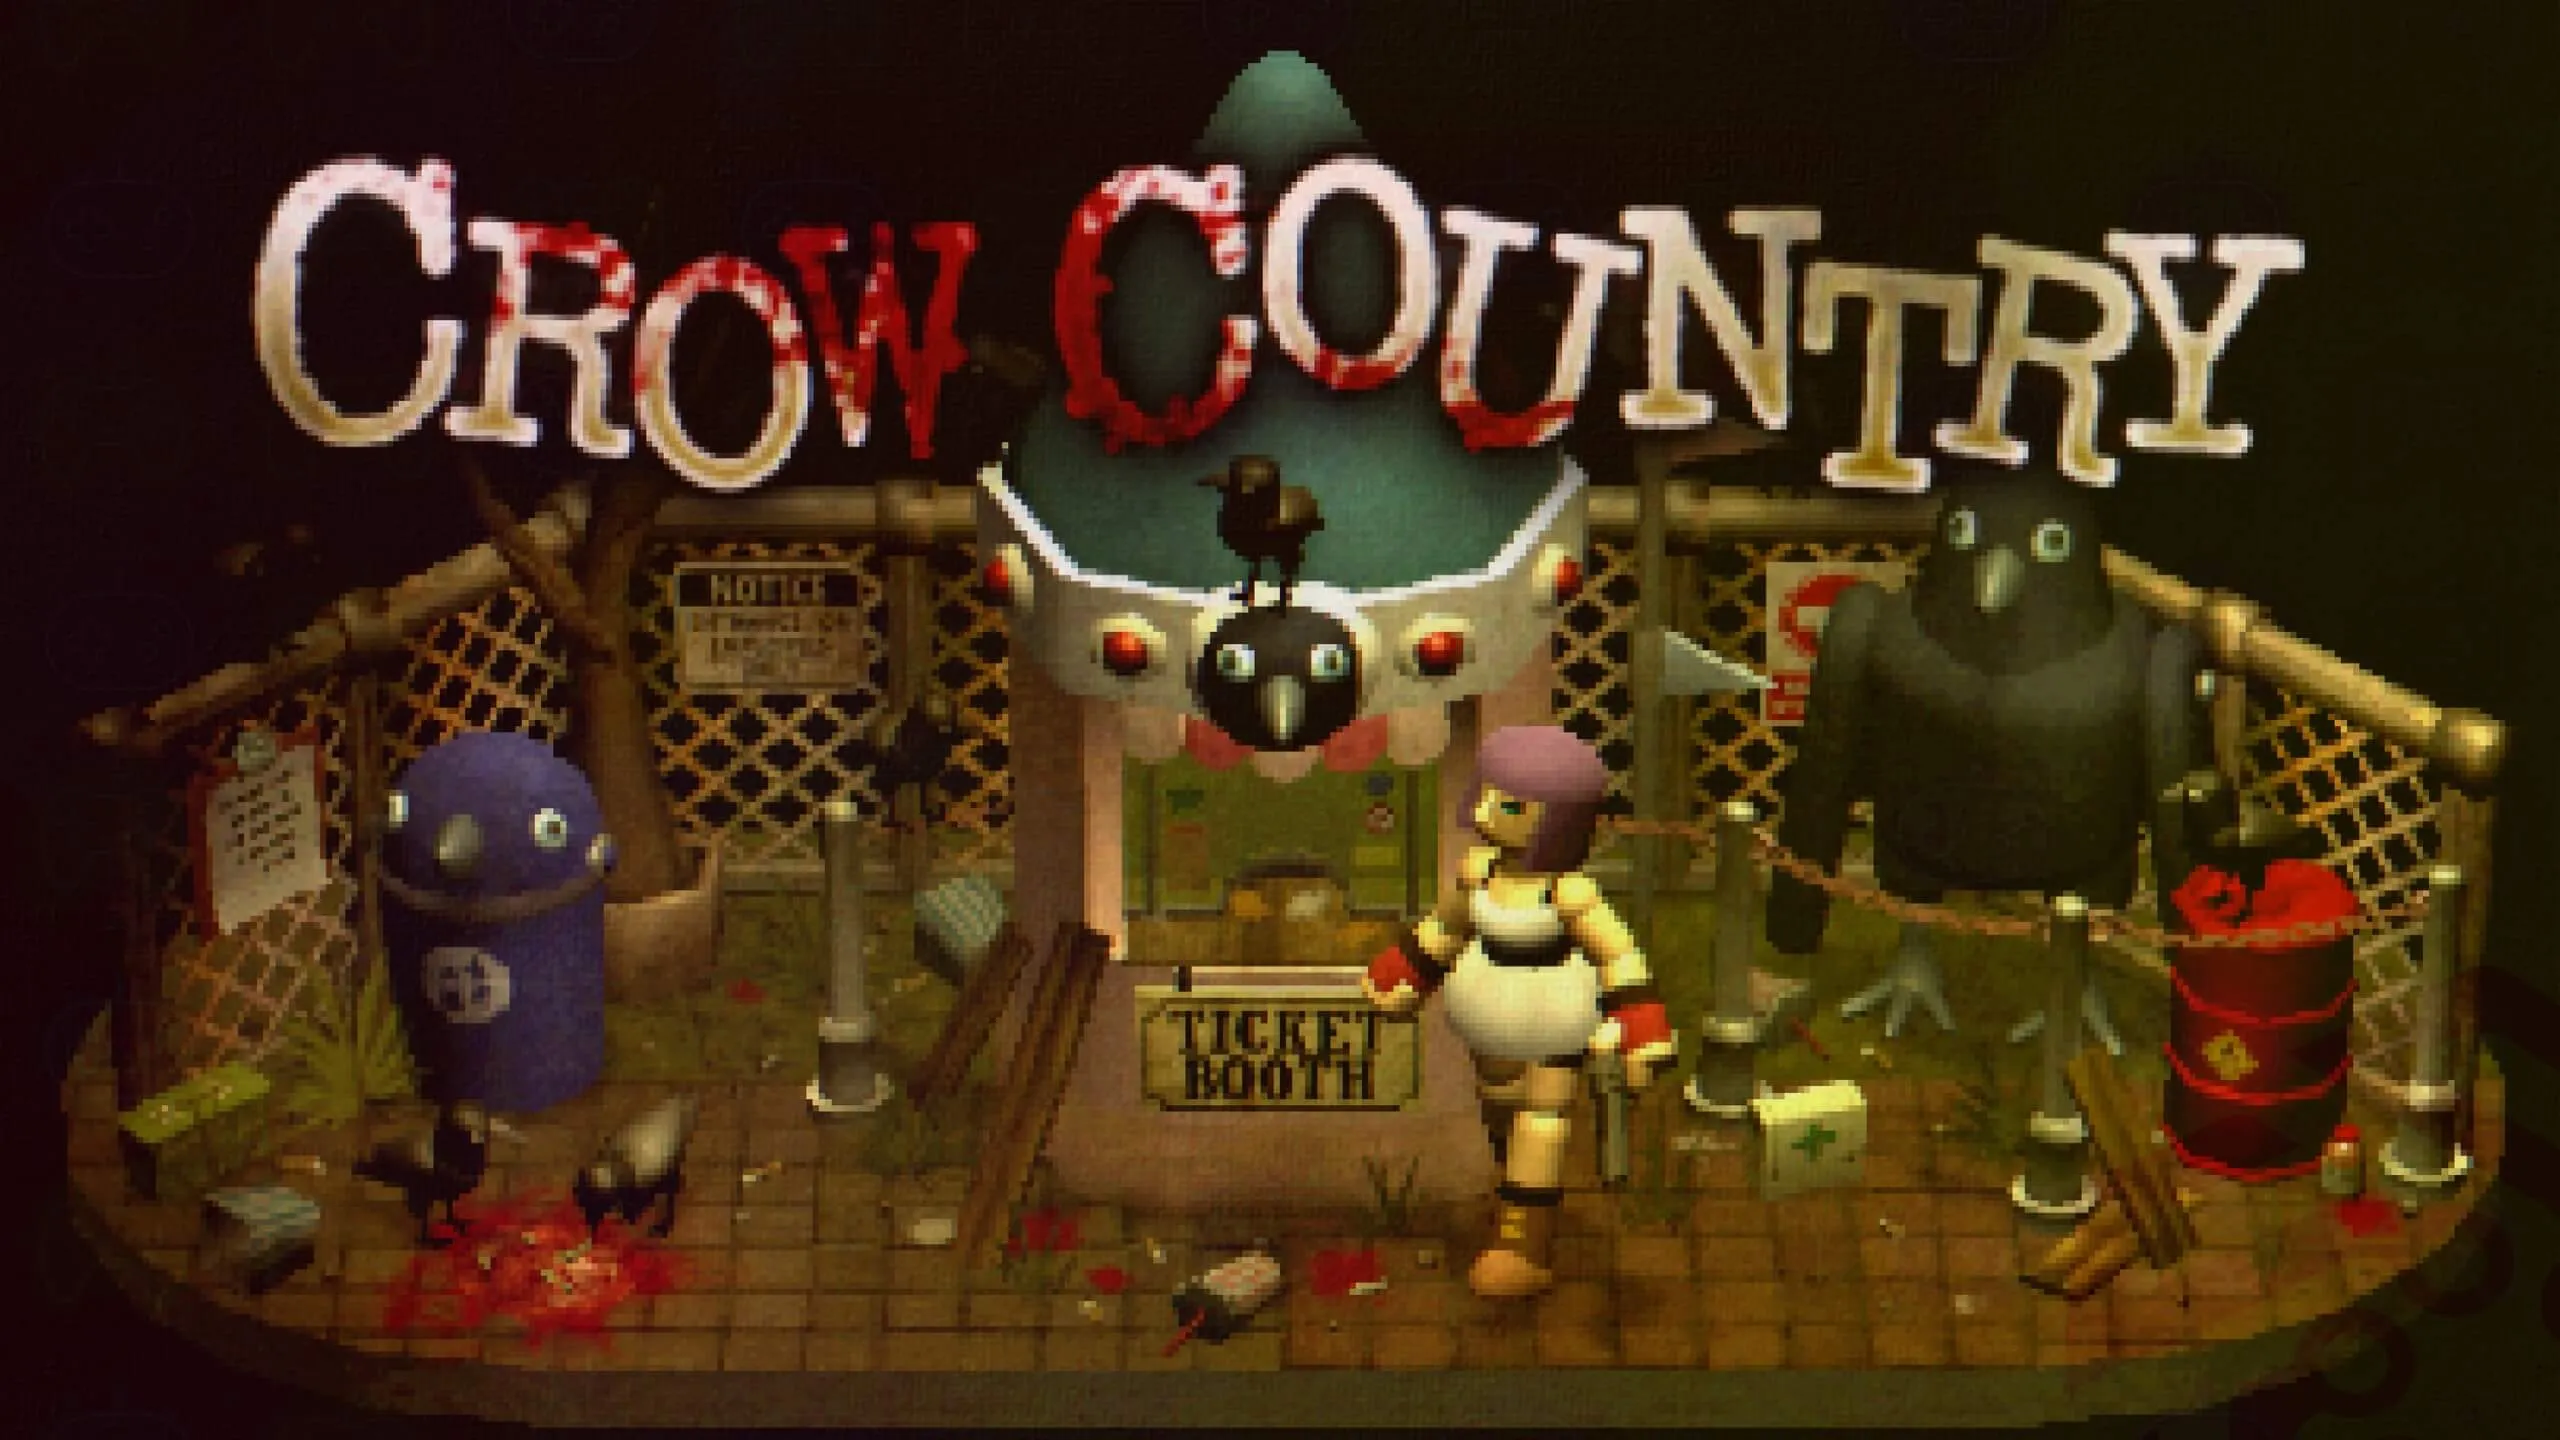 Pixel Key Art of Crow Country game